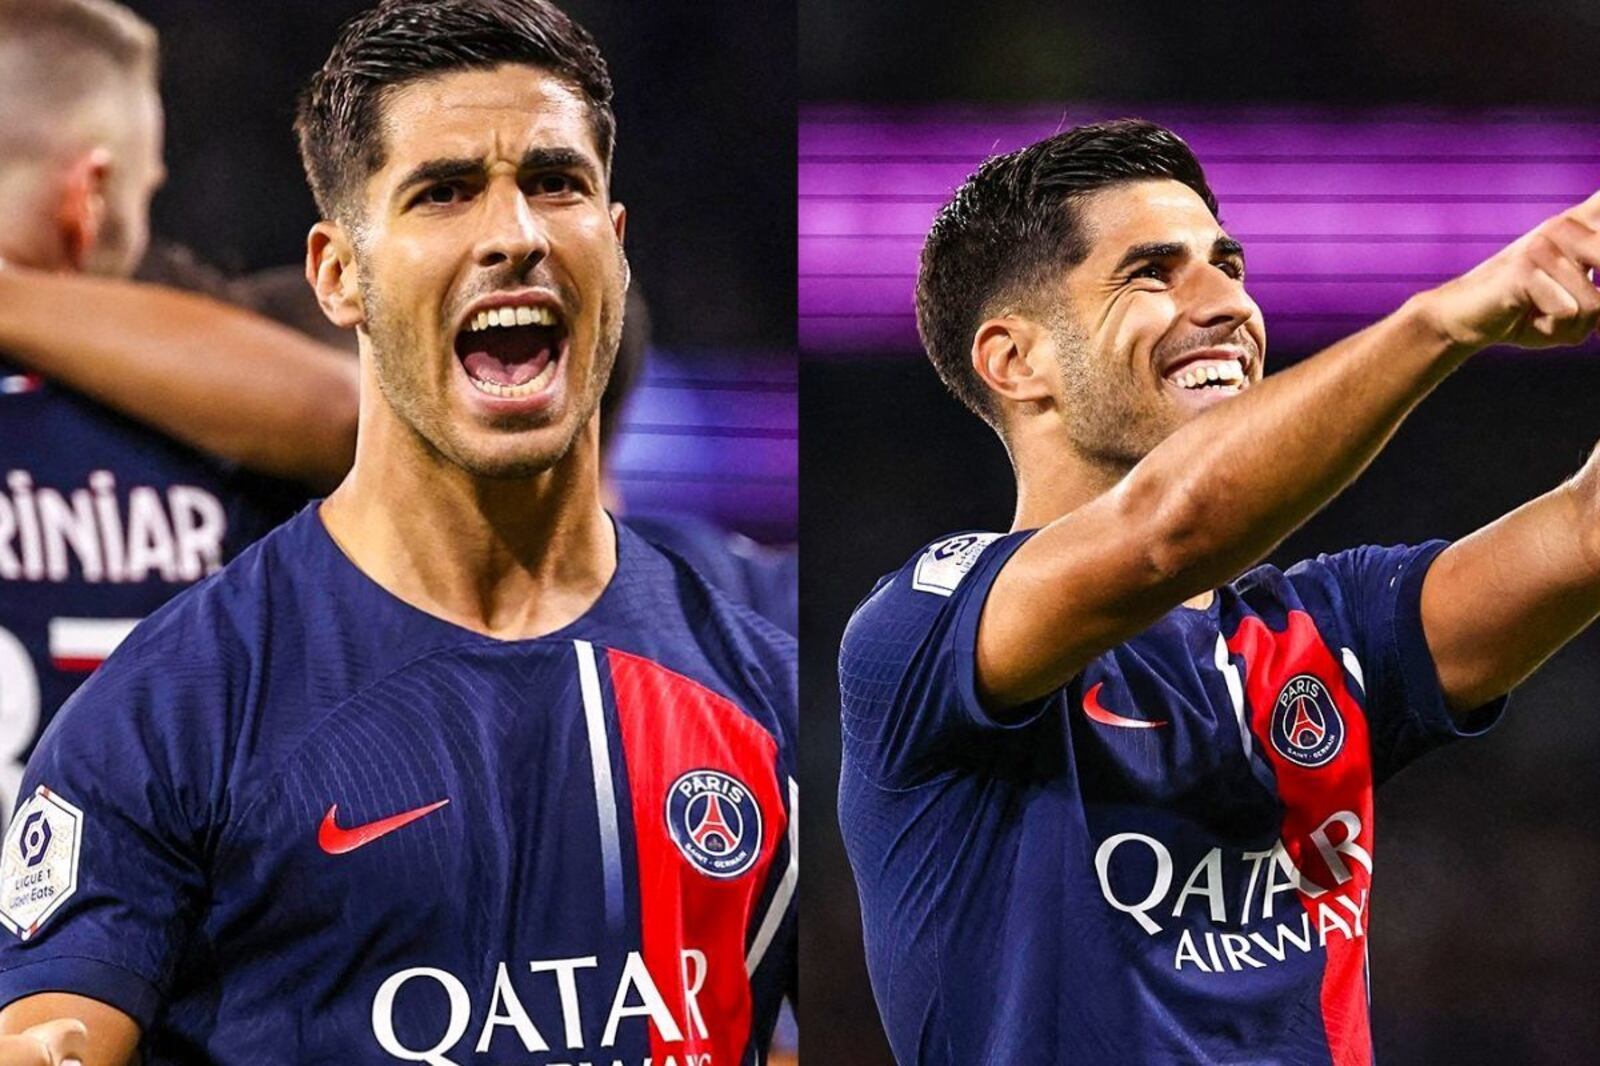 Marco Asensio scored his first goal with PSG against Lens and it couldn't be better